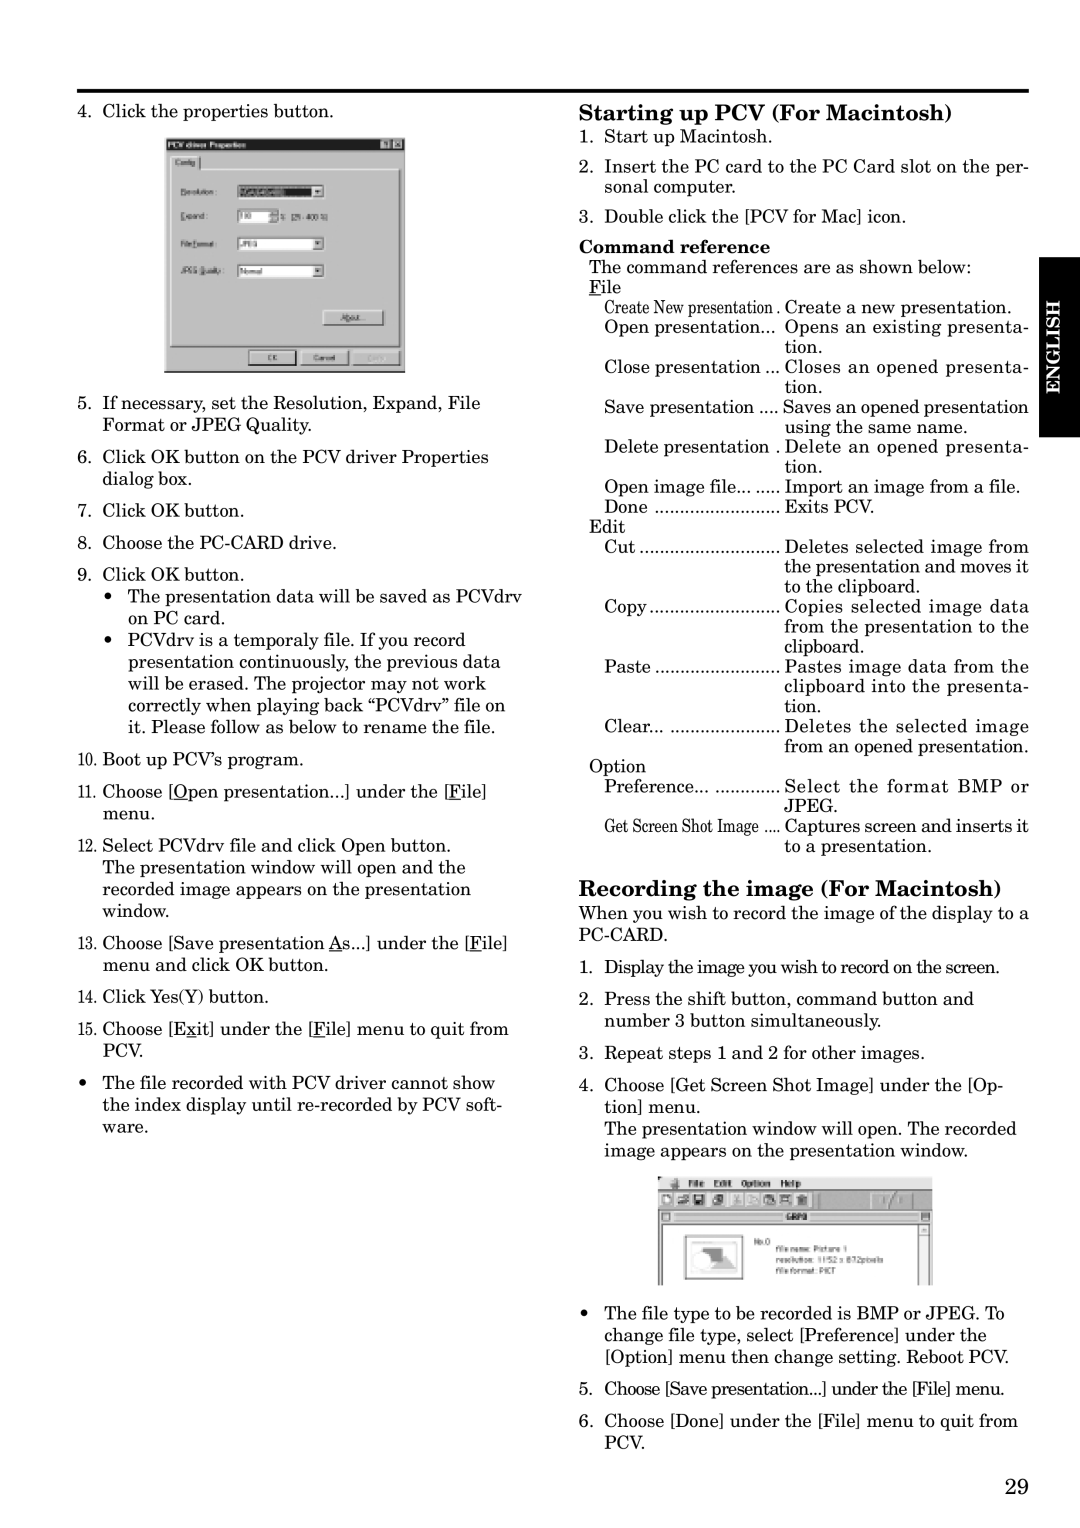 Mitsubishi Electronics LVP-S120A Starting up PCV For Macintosh, Recording the image For Macintosh, Command reference 